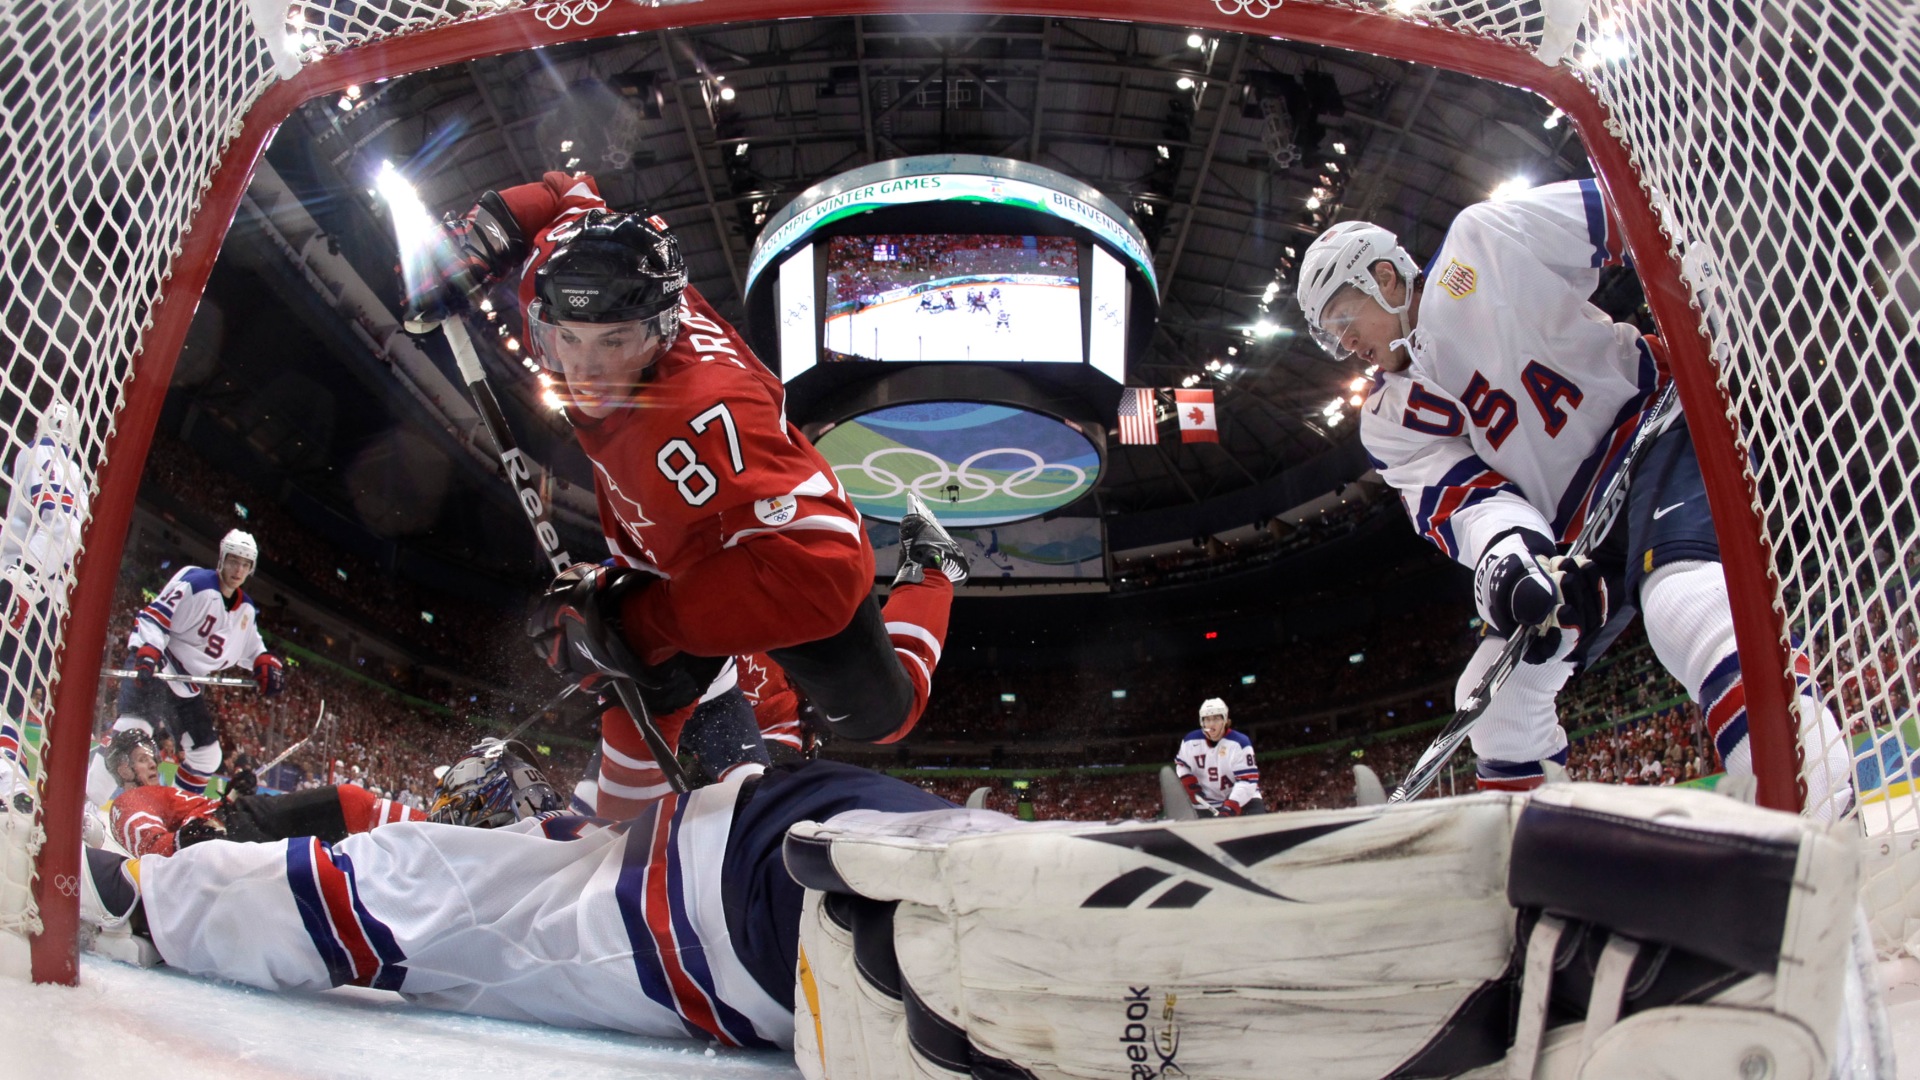 St. Louis Blues forward T.J. Oshie leads USA hockey past Russia in shootout, Sports